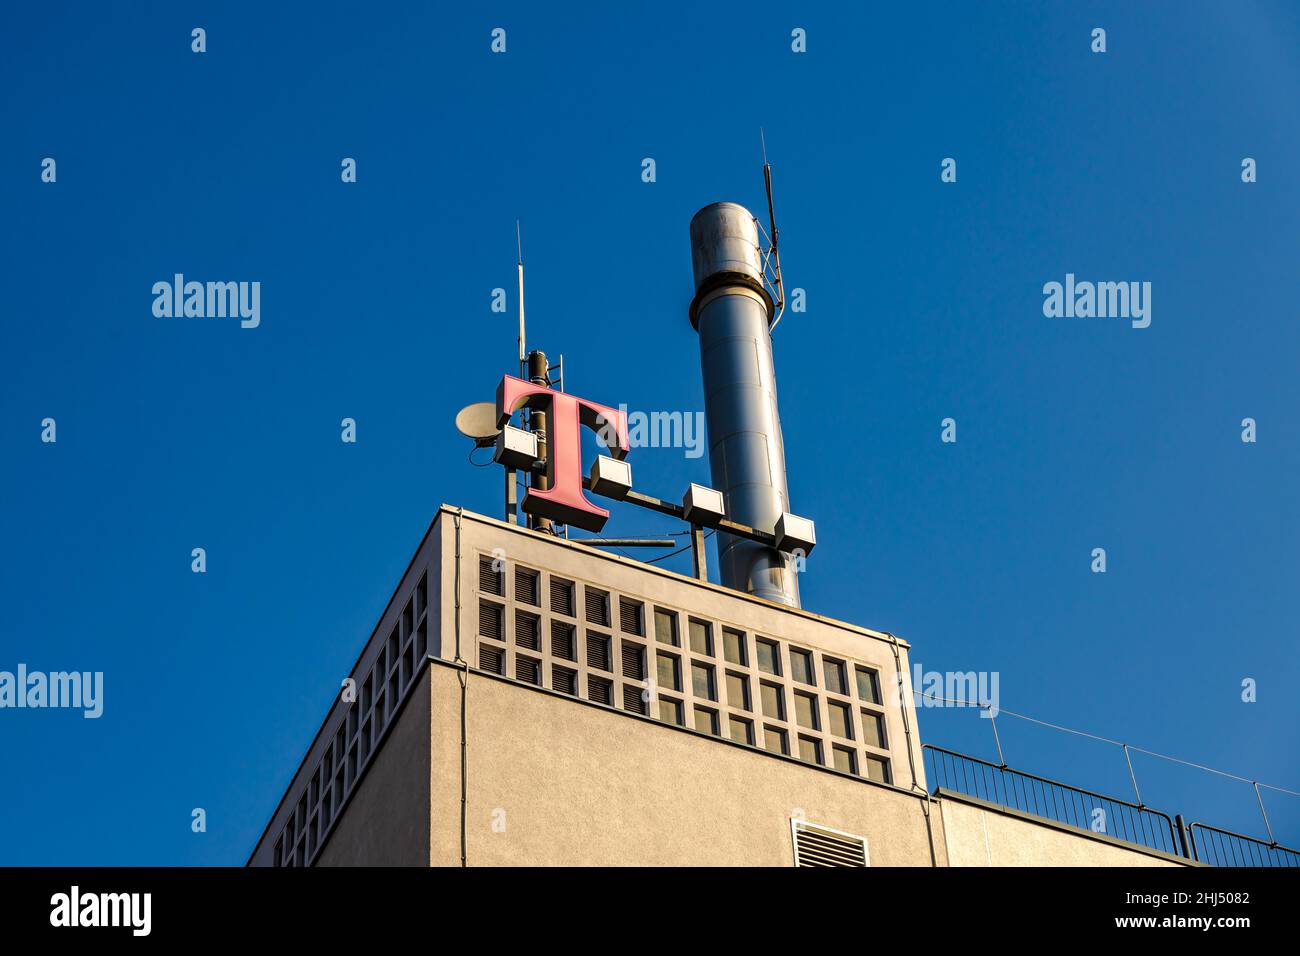 GIESSEN, GERMANY - 2021 04 09: T-Mobile Sign on a Building in Giessen beneath a roof. Stock Photo